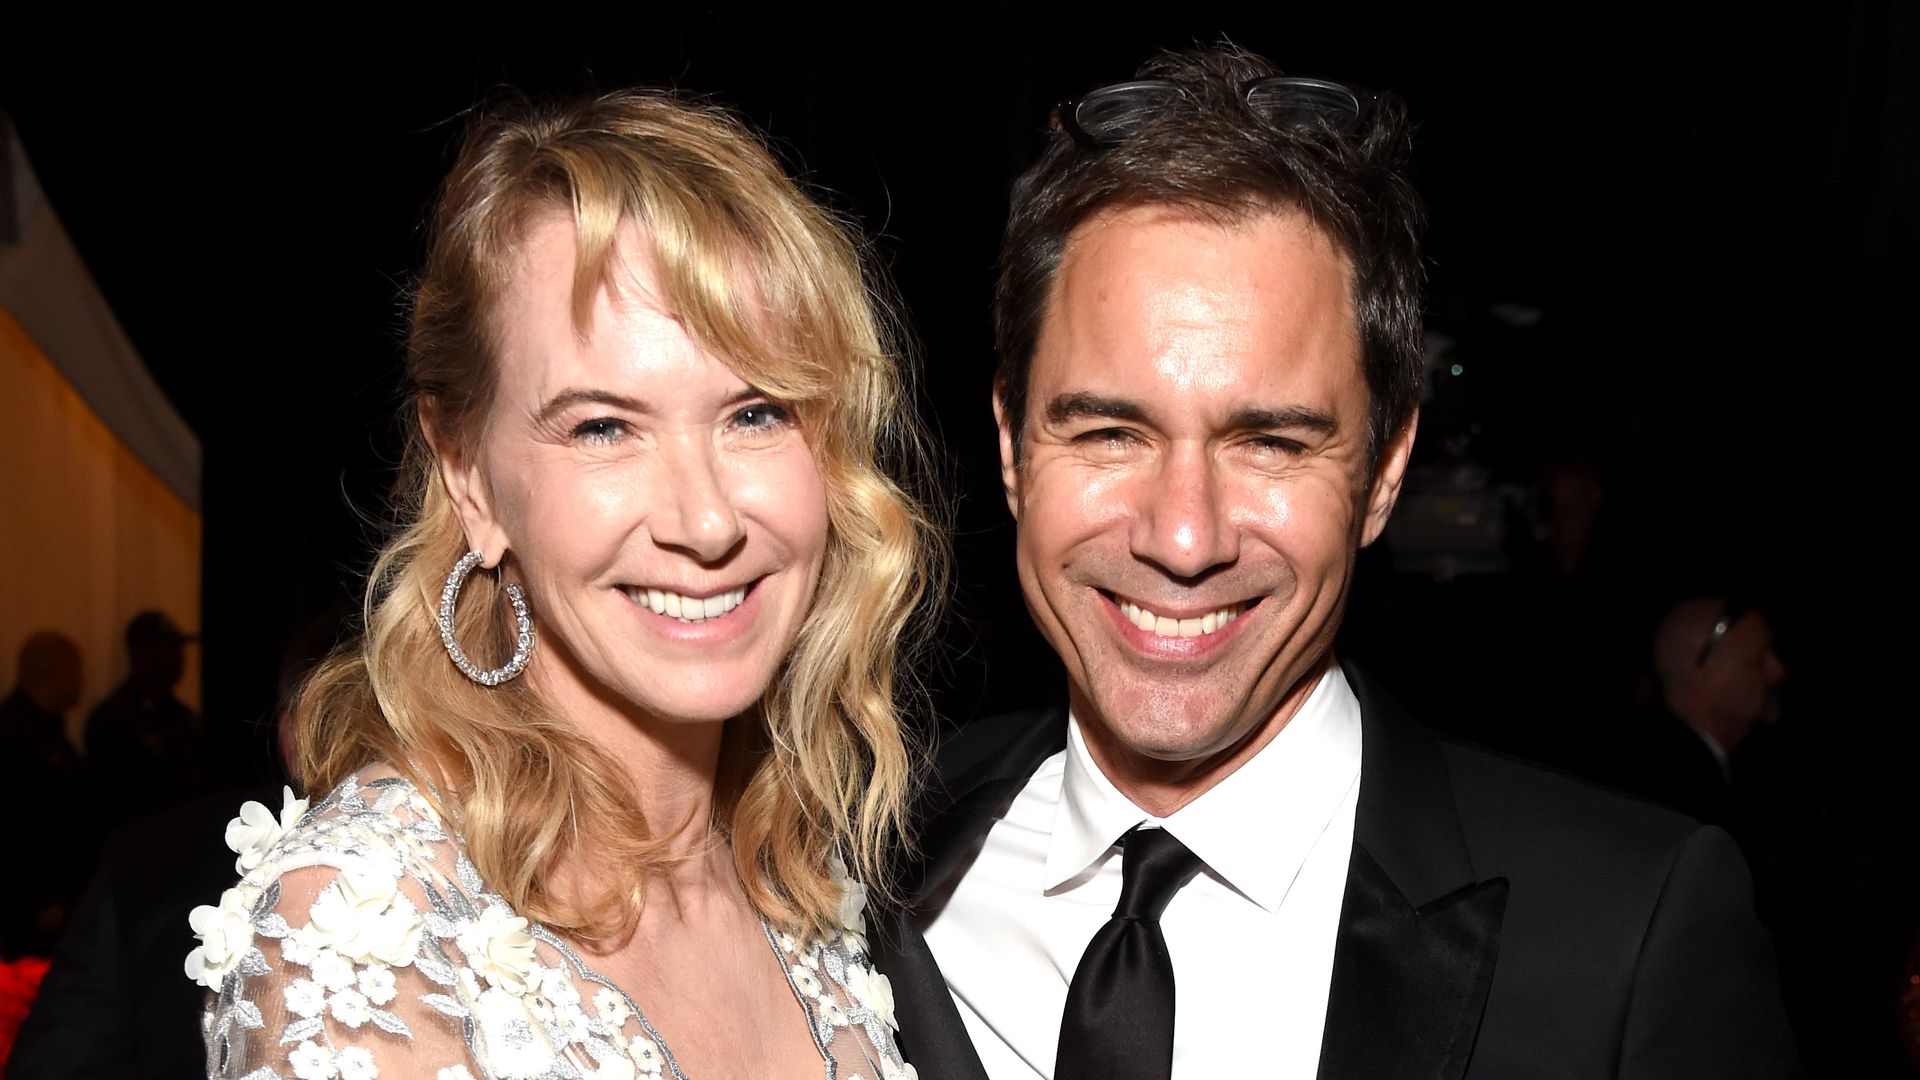 Inside Will & Grace's Eric McCormack and Janet Leigh's family life following divorce after 26 years – all about their rarely-seen son Finnigan